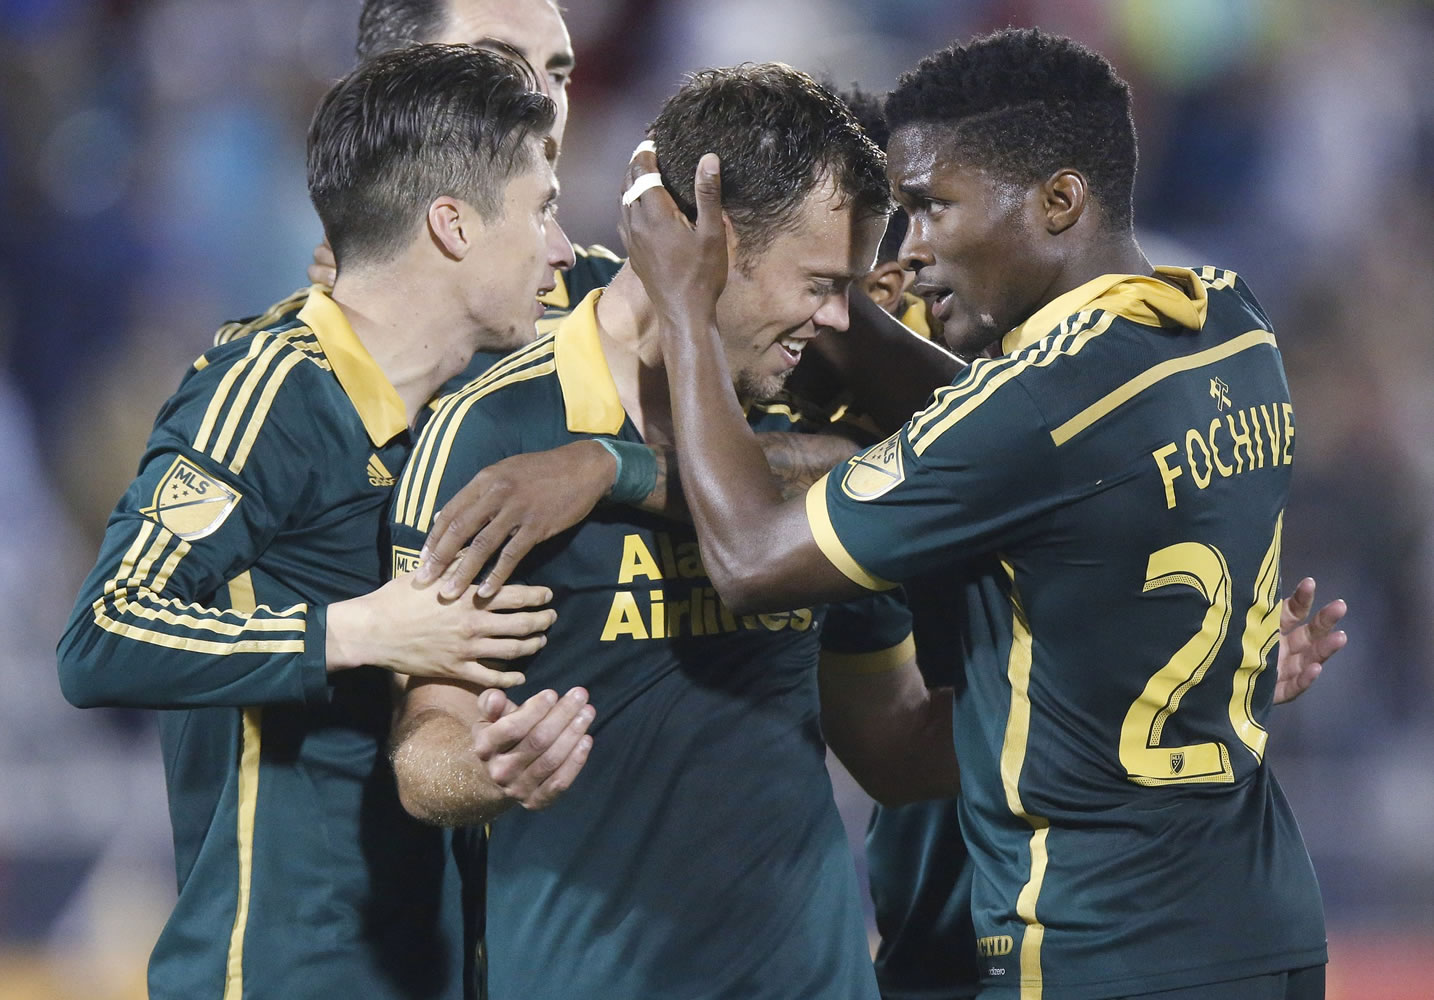 Portland Timbers midfielder Jack Jewsbury, center, is congratulated by defender Jorge Villafana, left, and midfielder George Fochive after Jewsbury scored the winning goal against the Colorado Rapids in Commerce City, Colo.